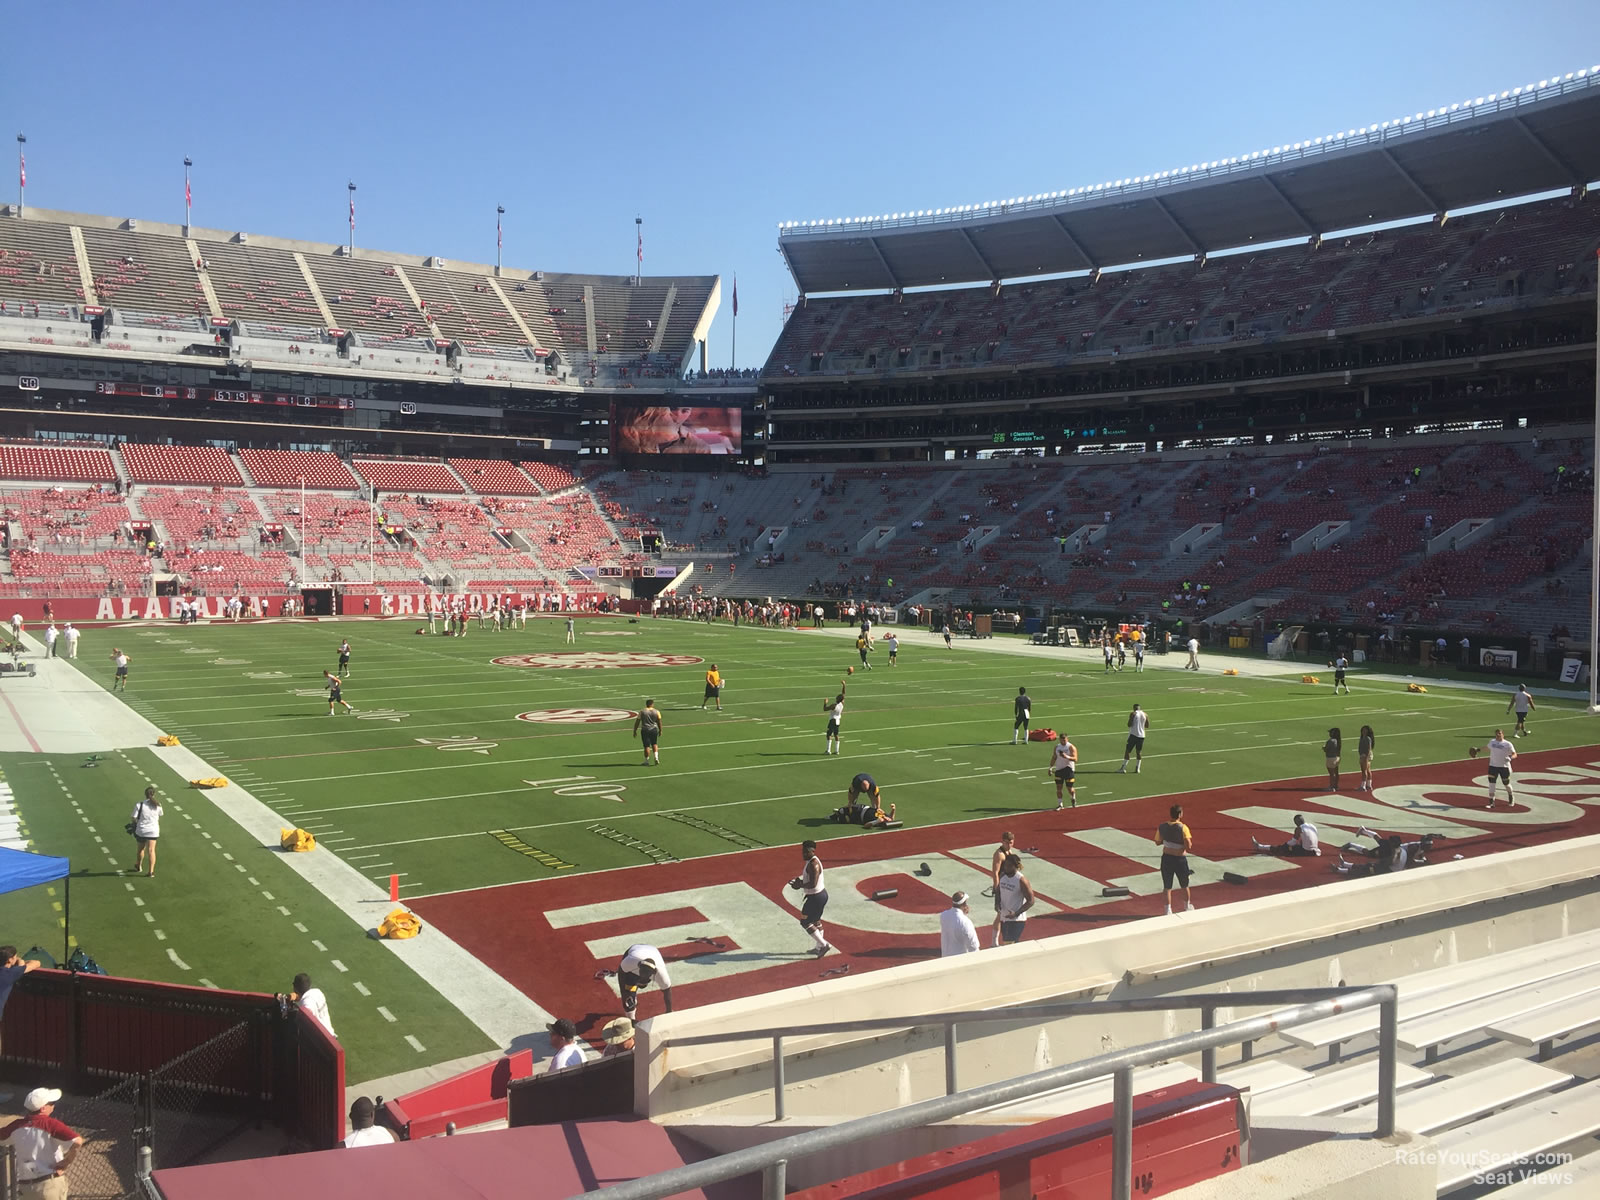 section s8, row 25 seat view  - bryant-denny stadium